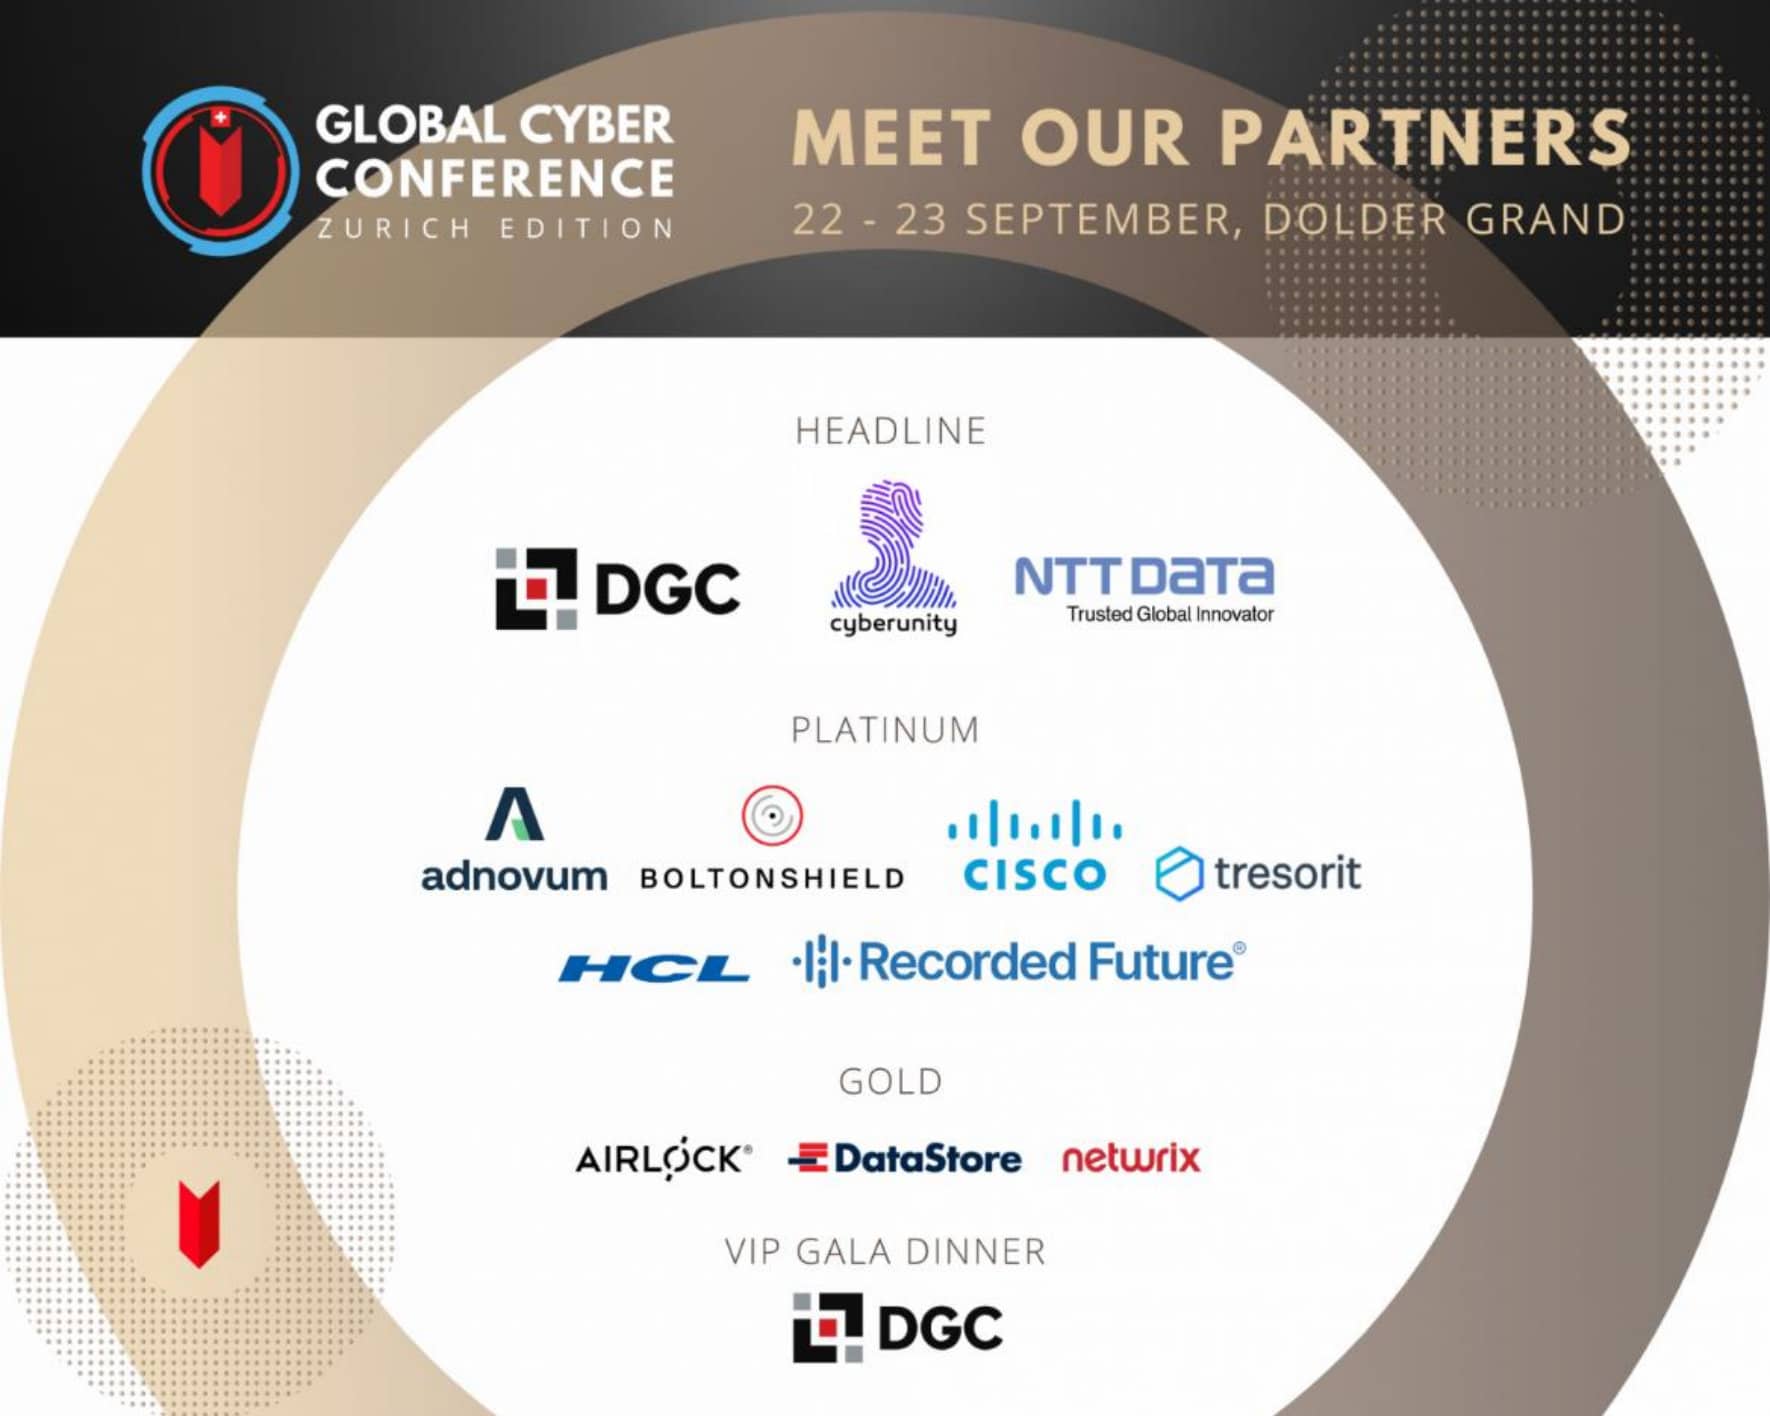 Global Cyber Conference meet our partners